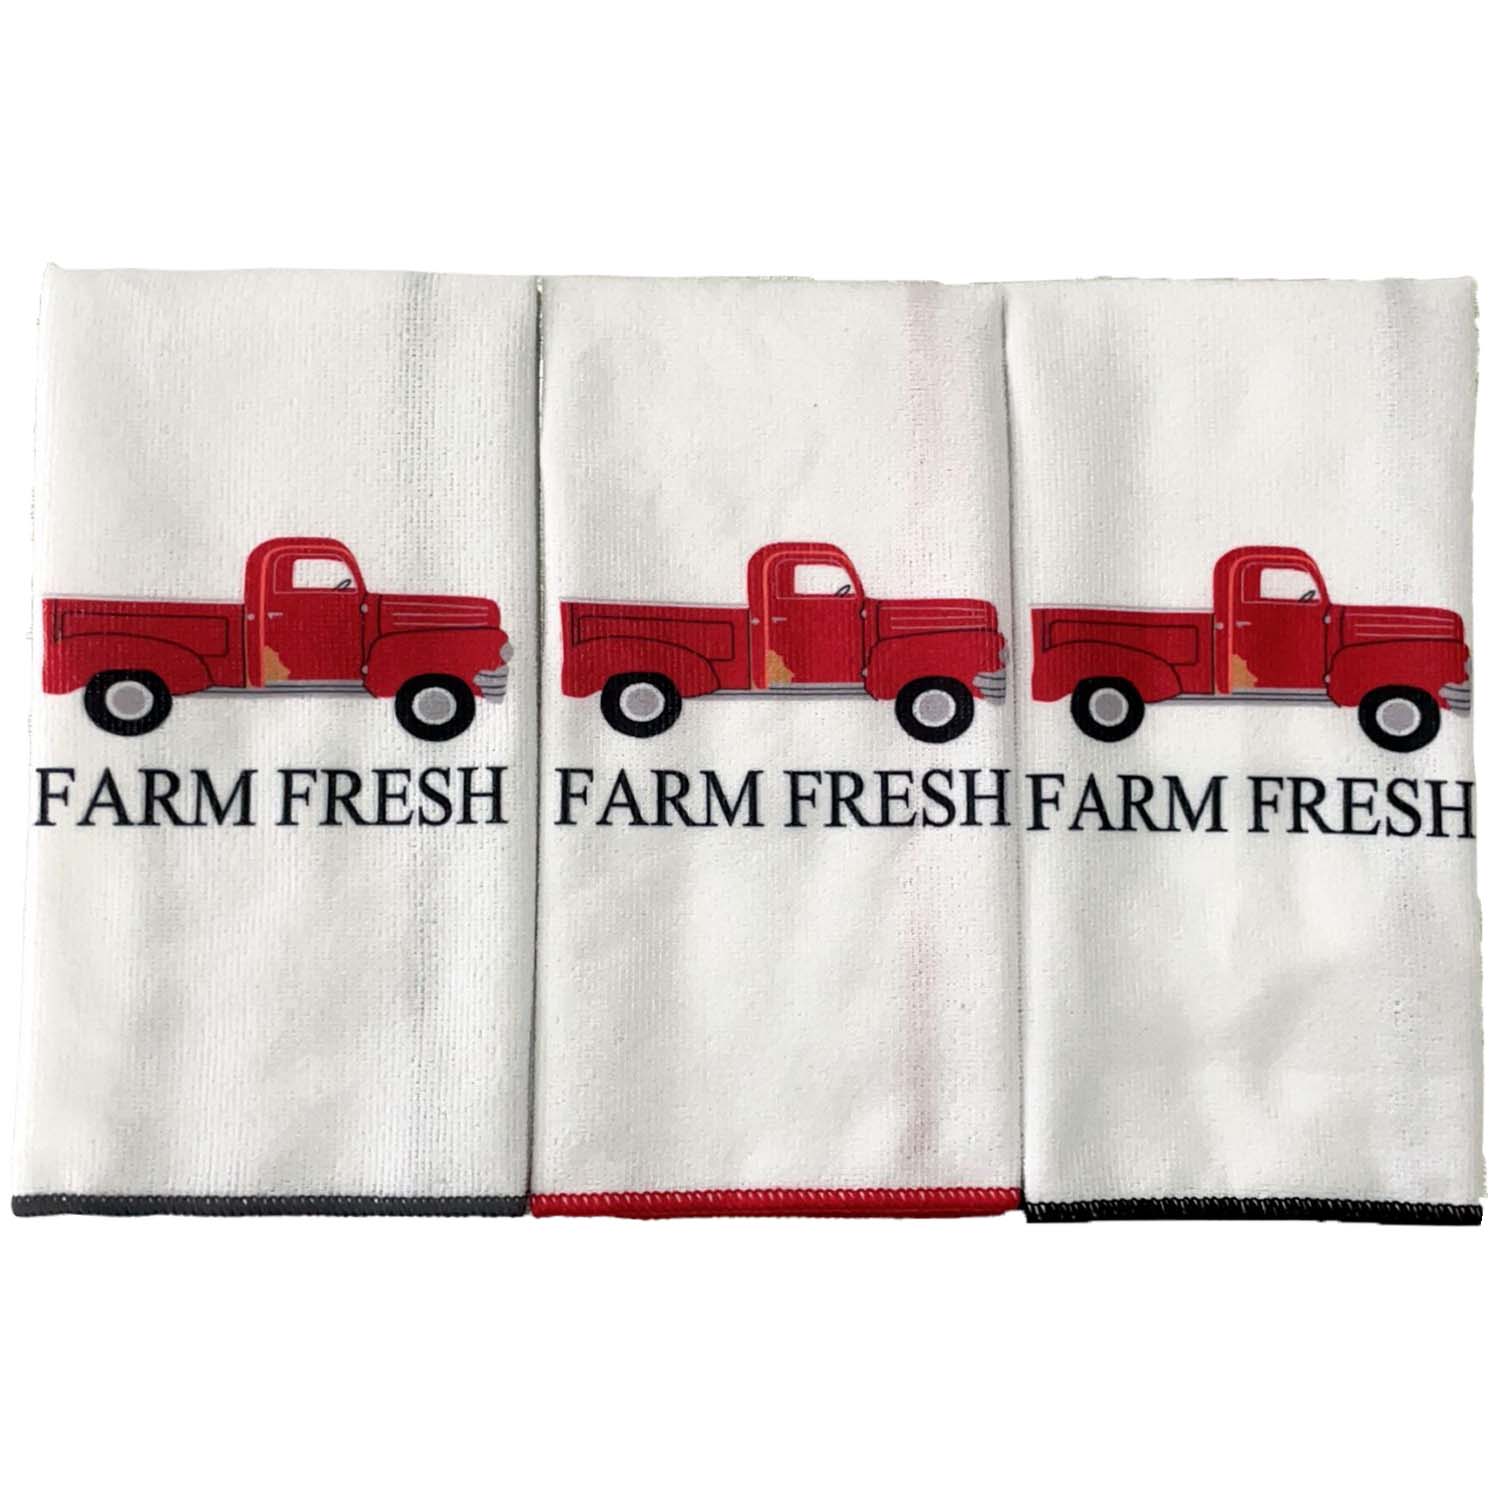 Barn Home Bath Collection - Set of 2 Hand Towels